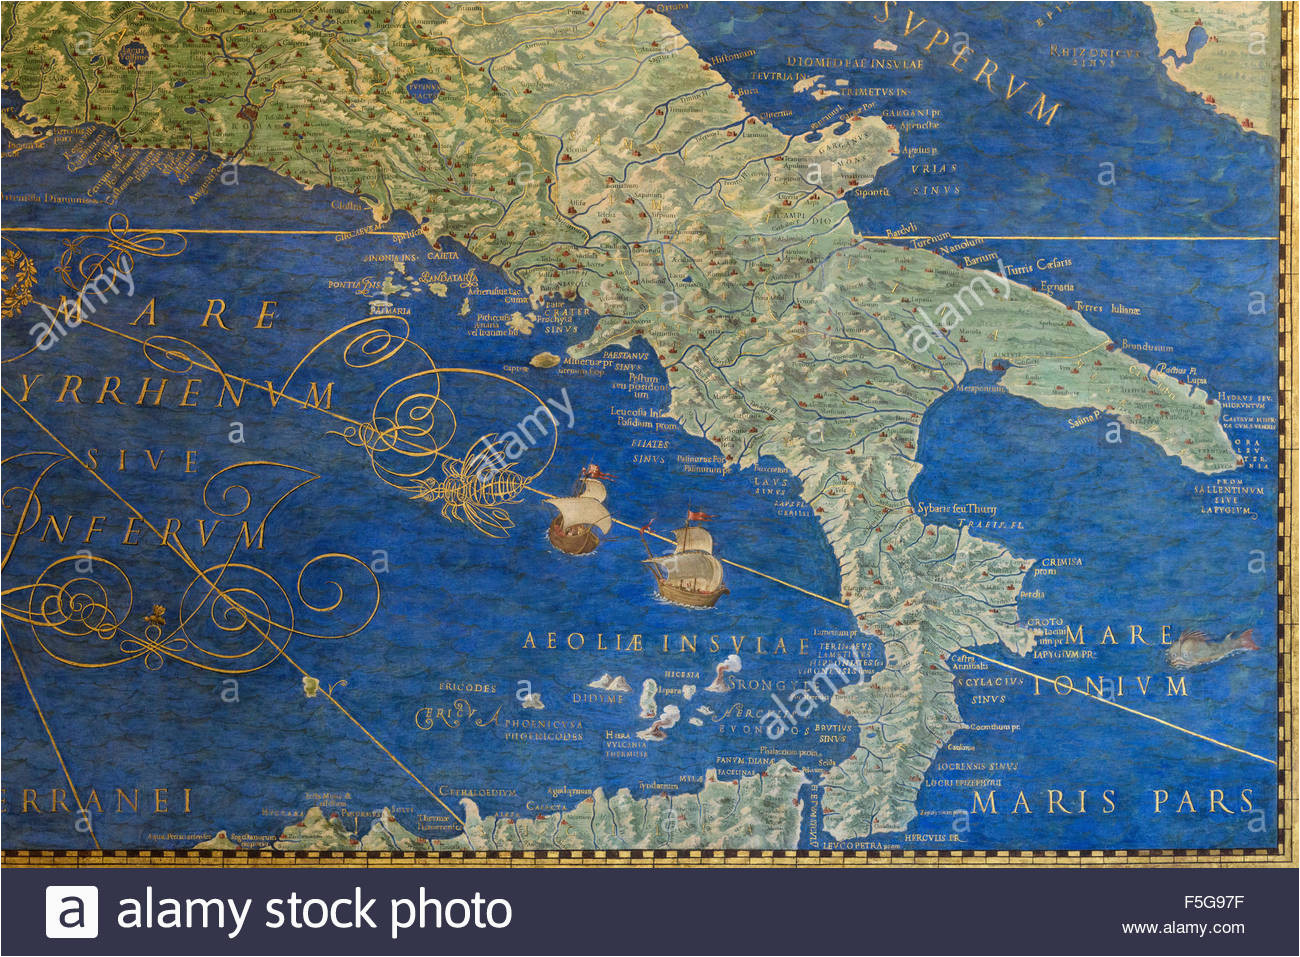 italy map stock photos italy map stock images alamy